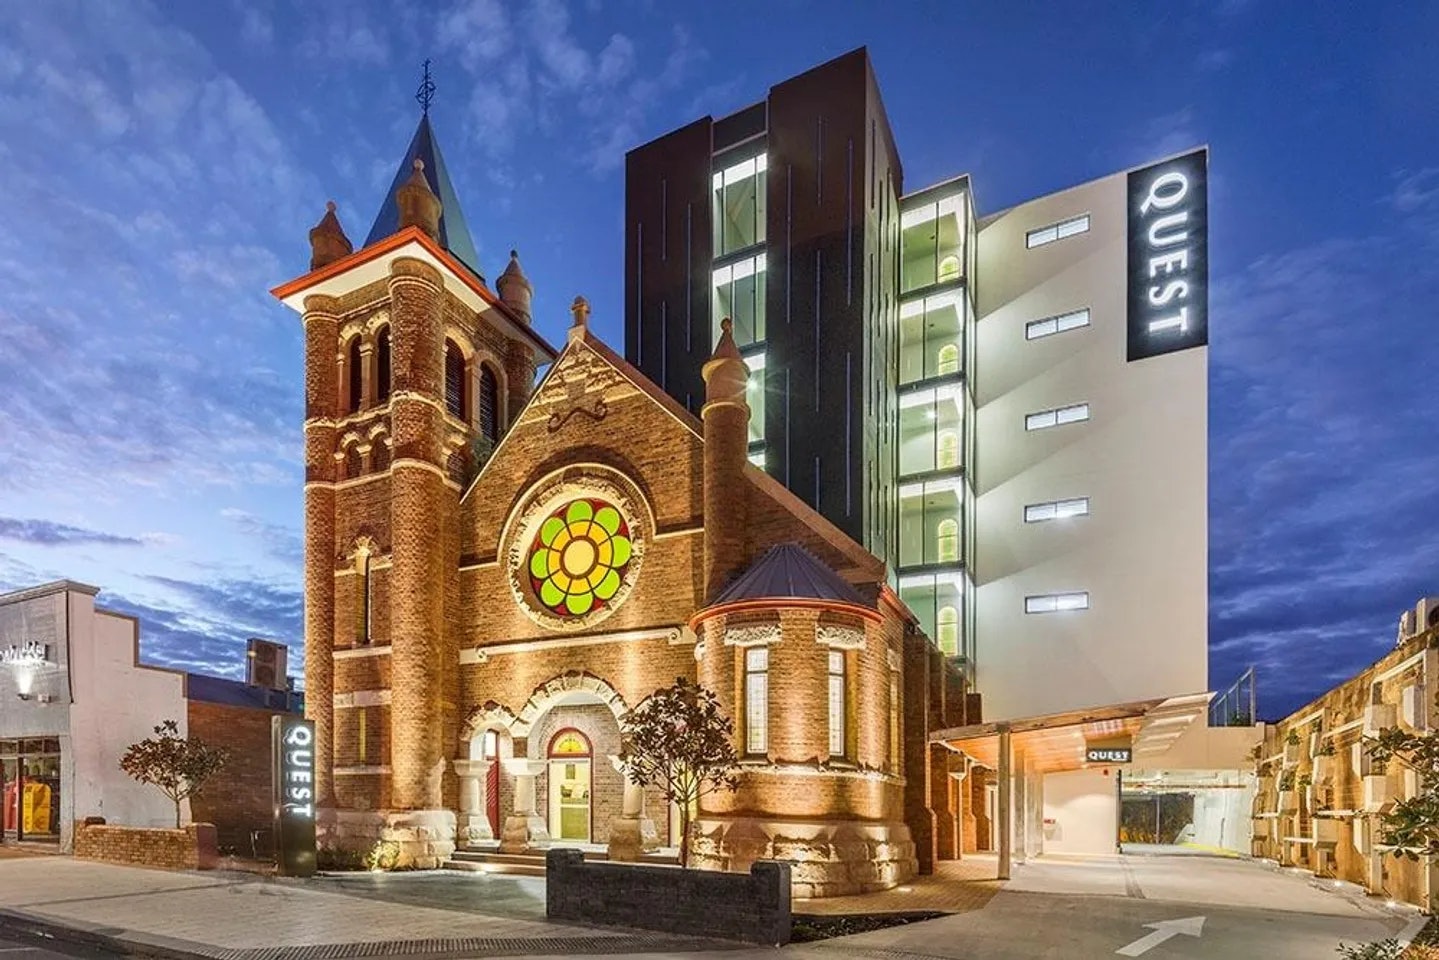 The Quest Hotel Toowoomba